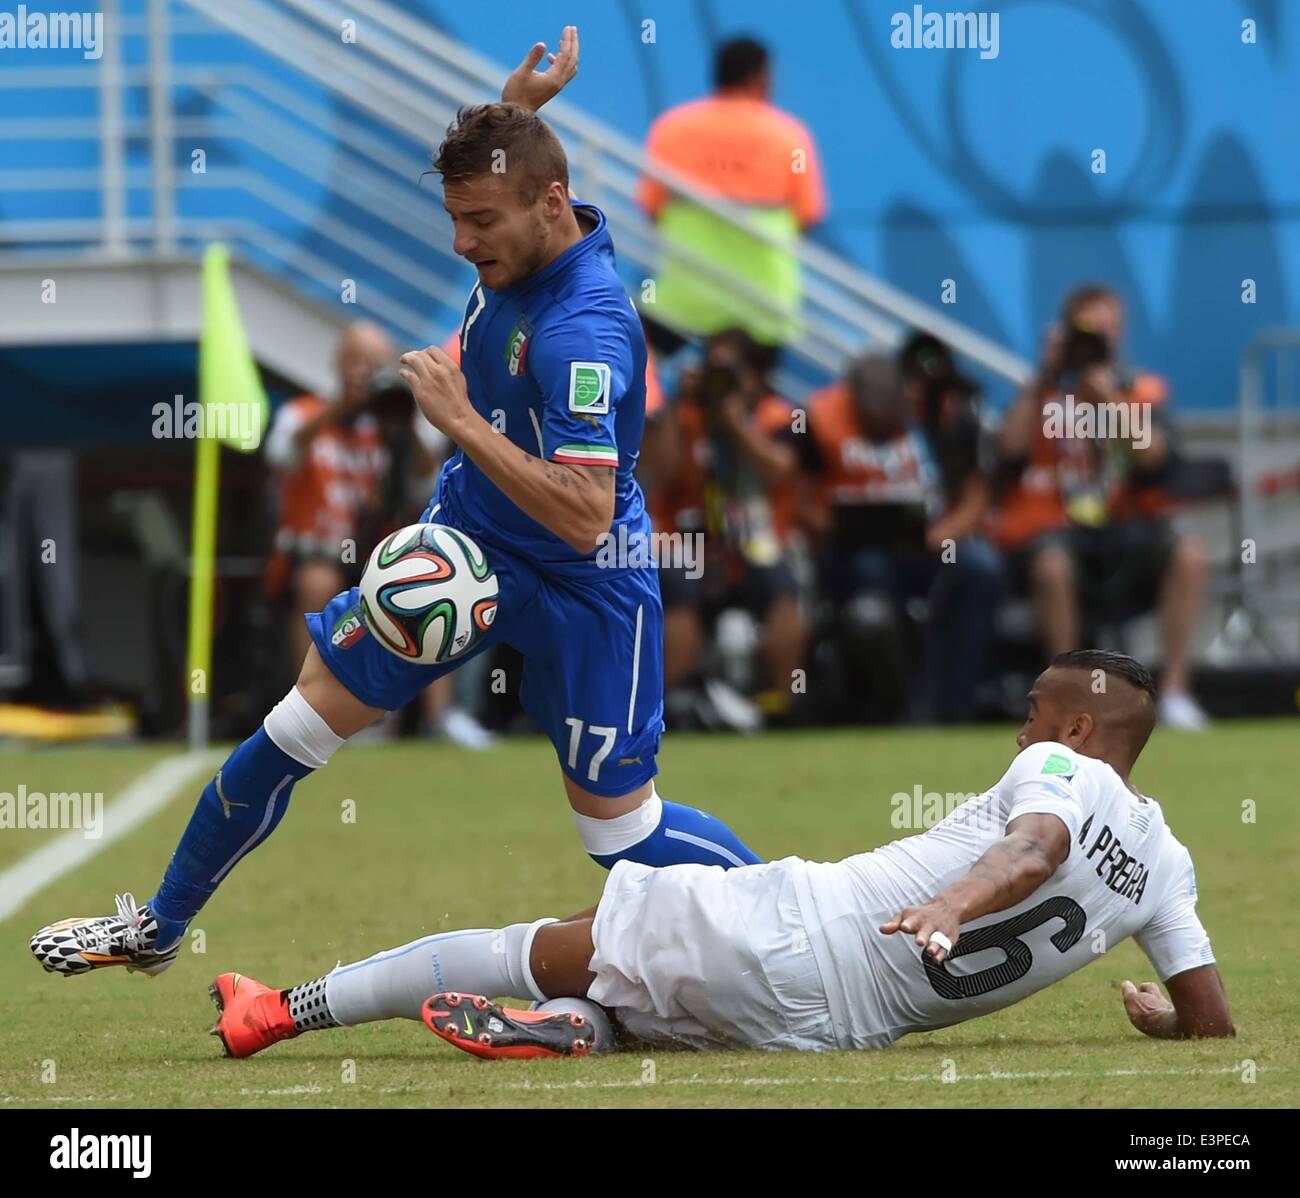 Natal, Brazil. 24th June, 2014. Italy's Ciro Immobile vies with Uruguay's Alvaro Pereira during a Group D match between Italy and Uruguay of 2014 FIFA World Cup at the Estadio das Dunas Stadium in Natal, Brazil, June 24, 2014. © Guo Yong/Xinhua/Alamy Live News Stock Photo